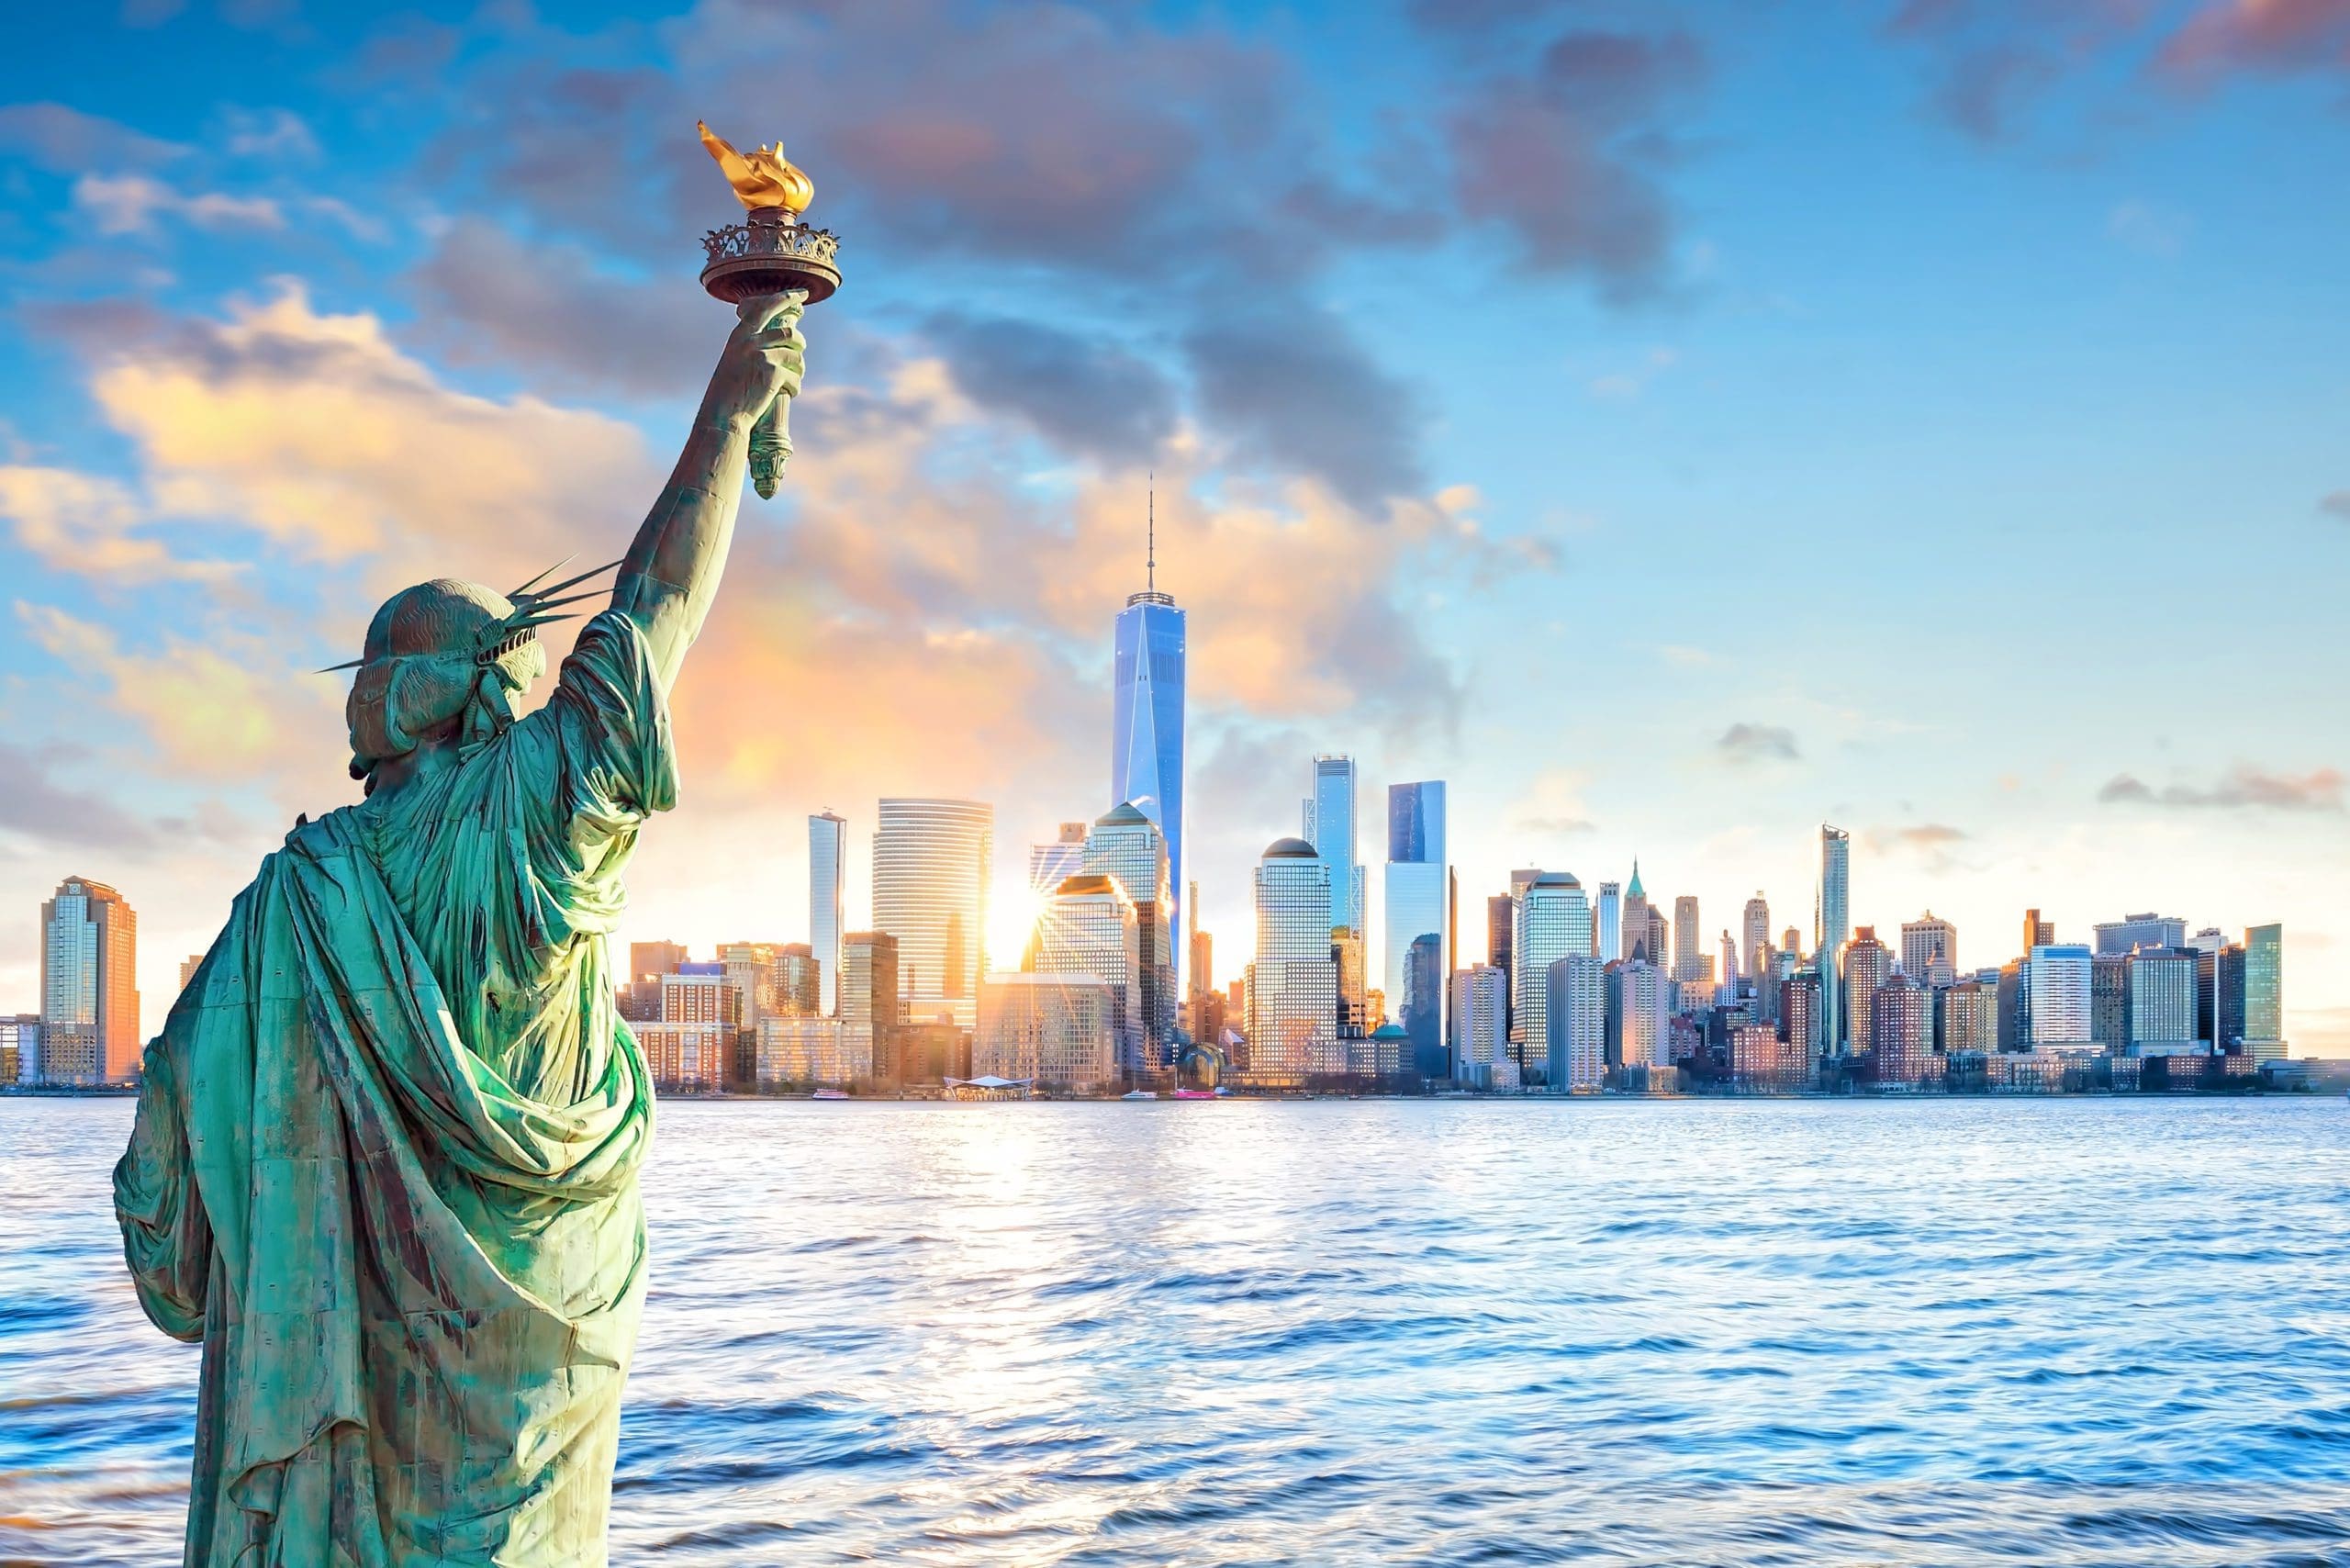 11 Ideas For A Bucket List Vacation In The USA